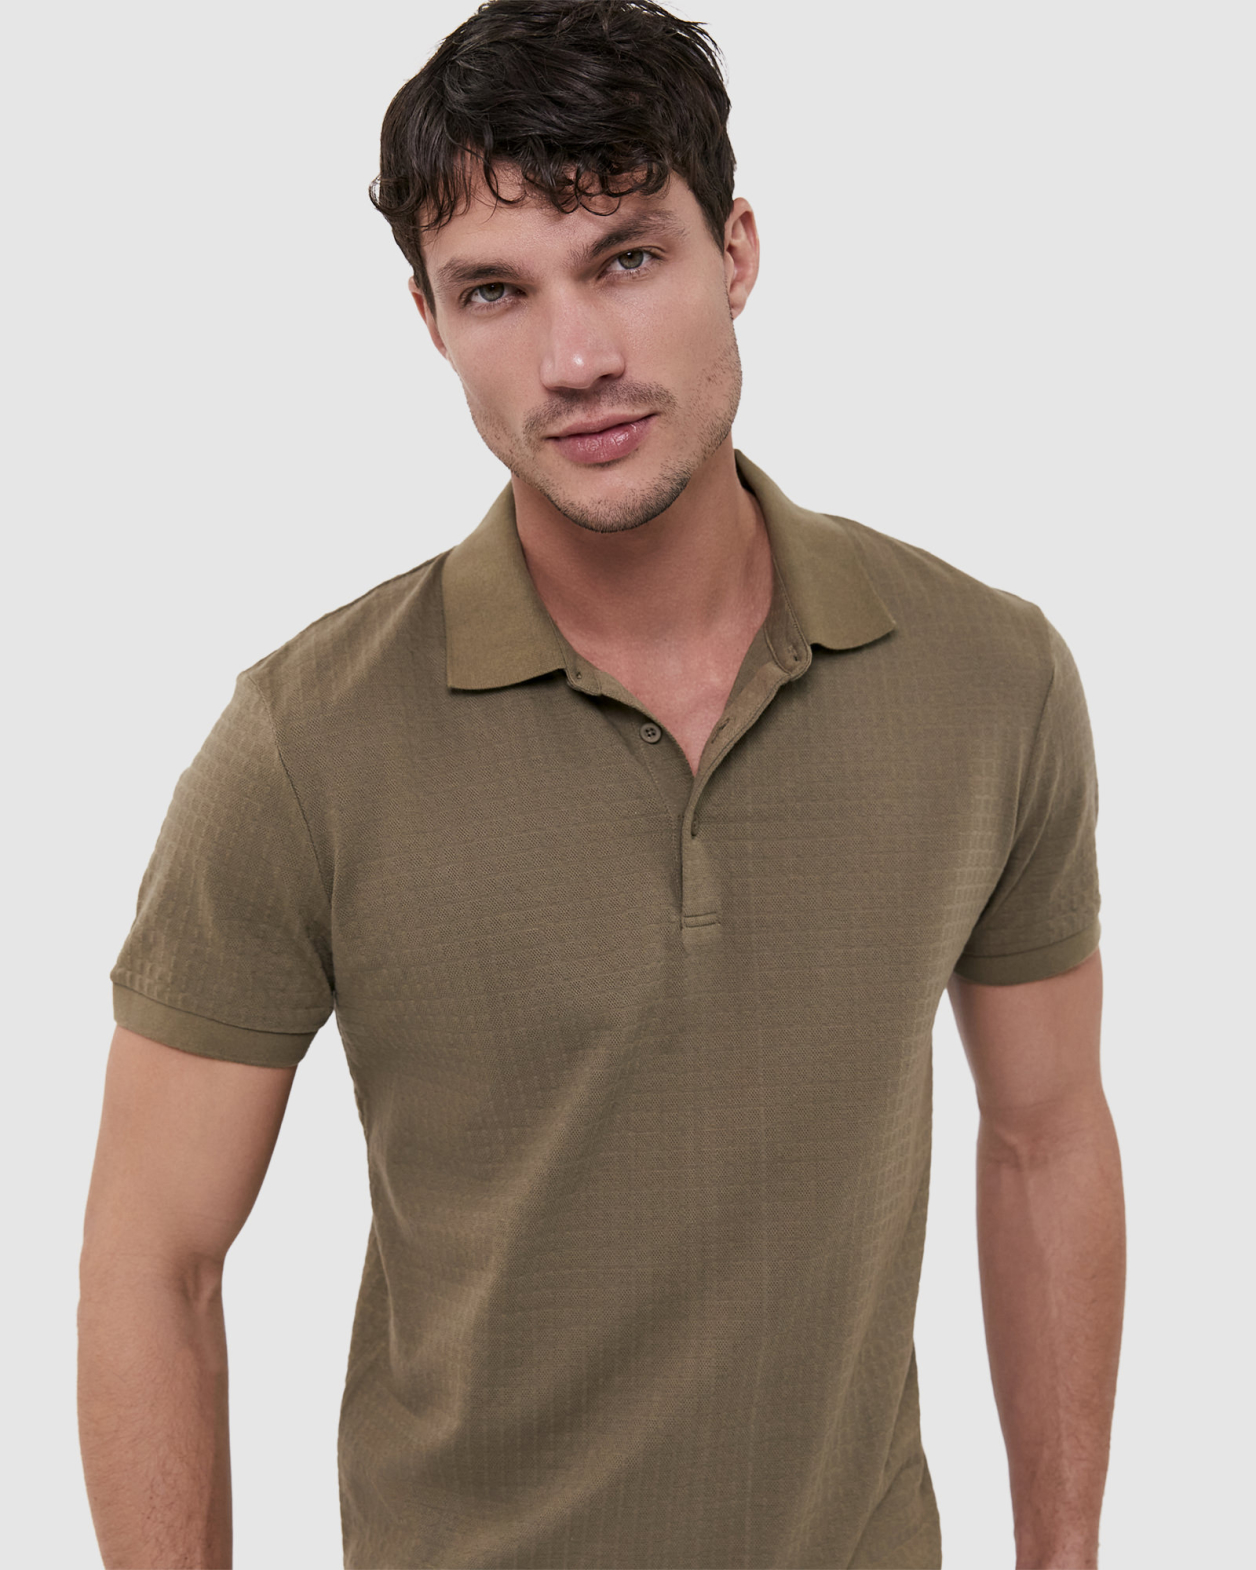 Carlos Textured Polo in GRASS